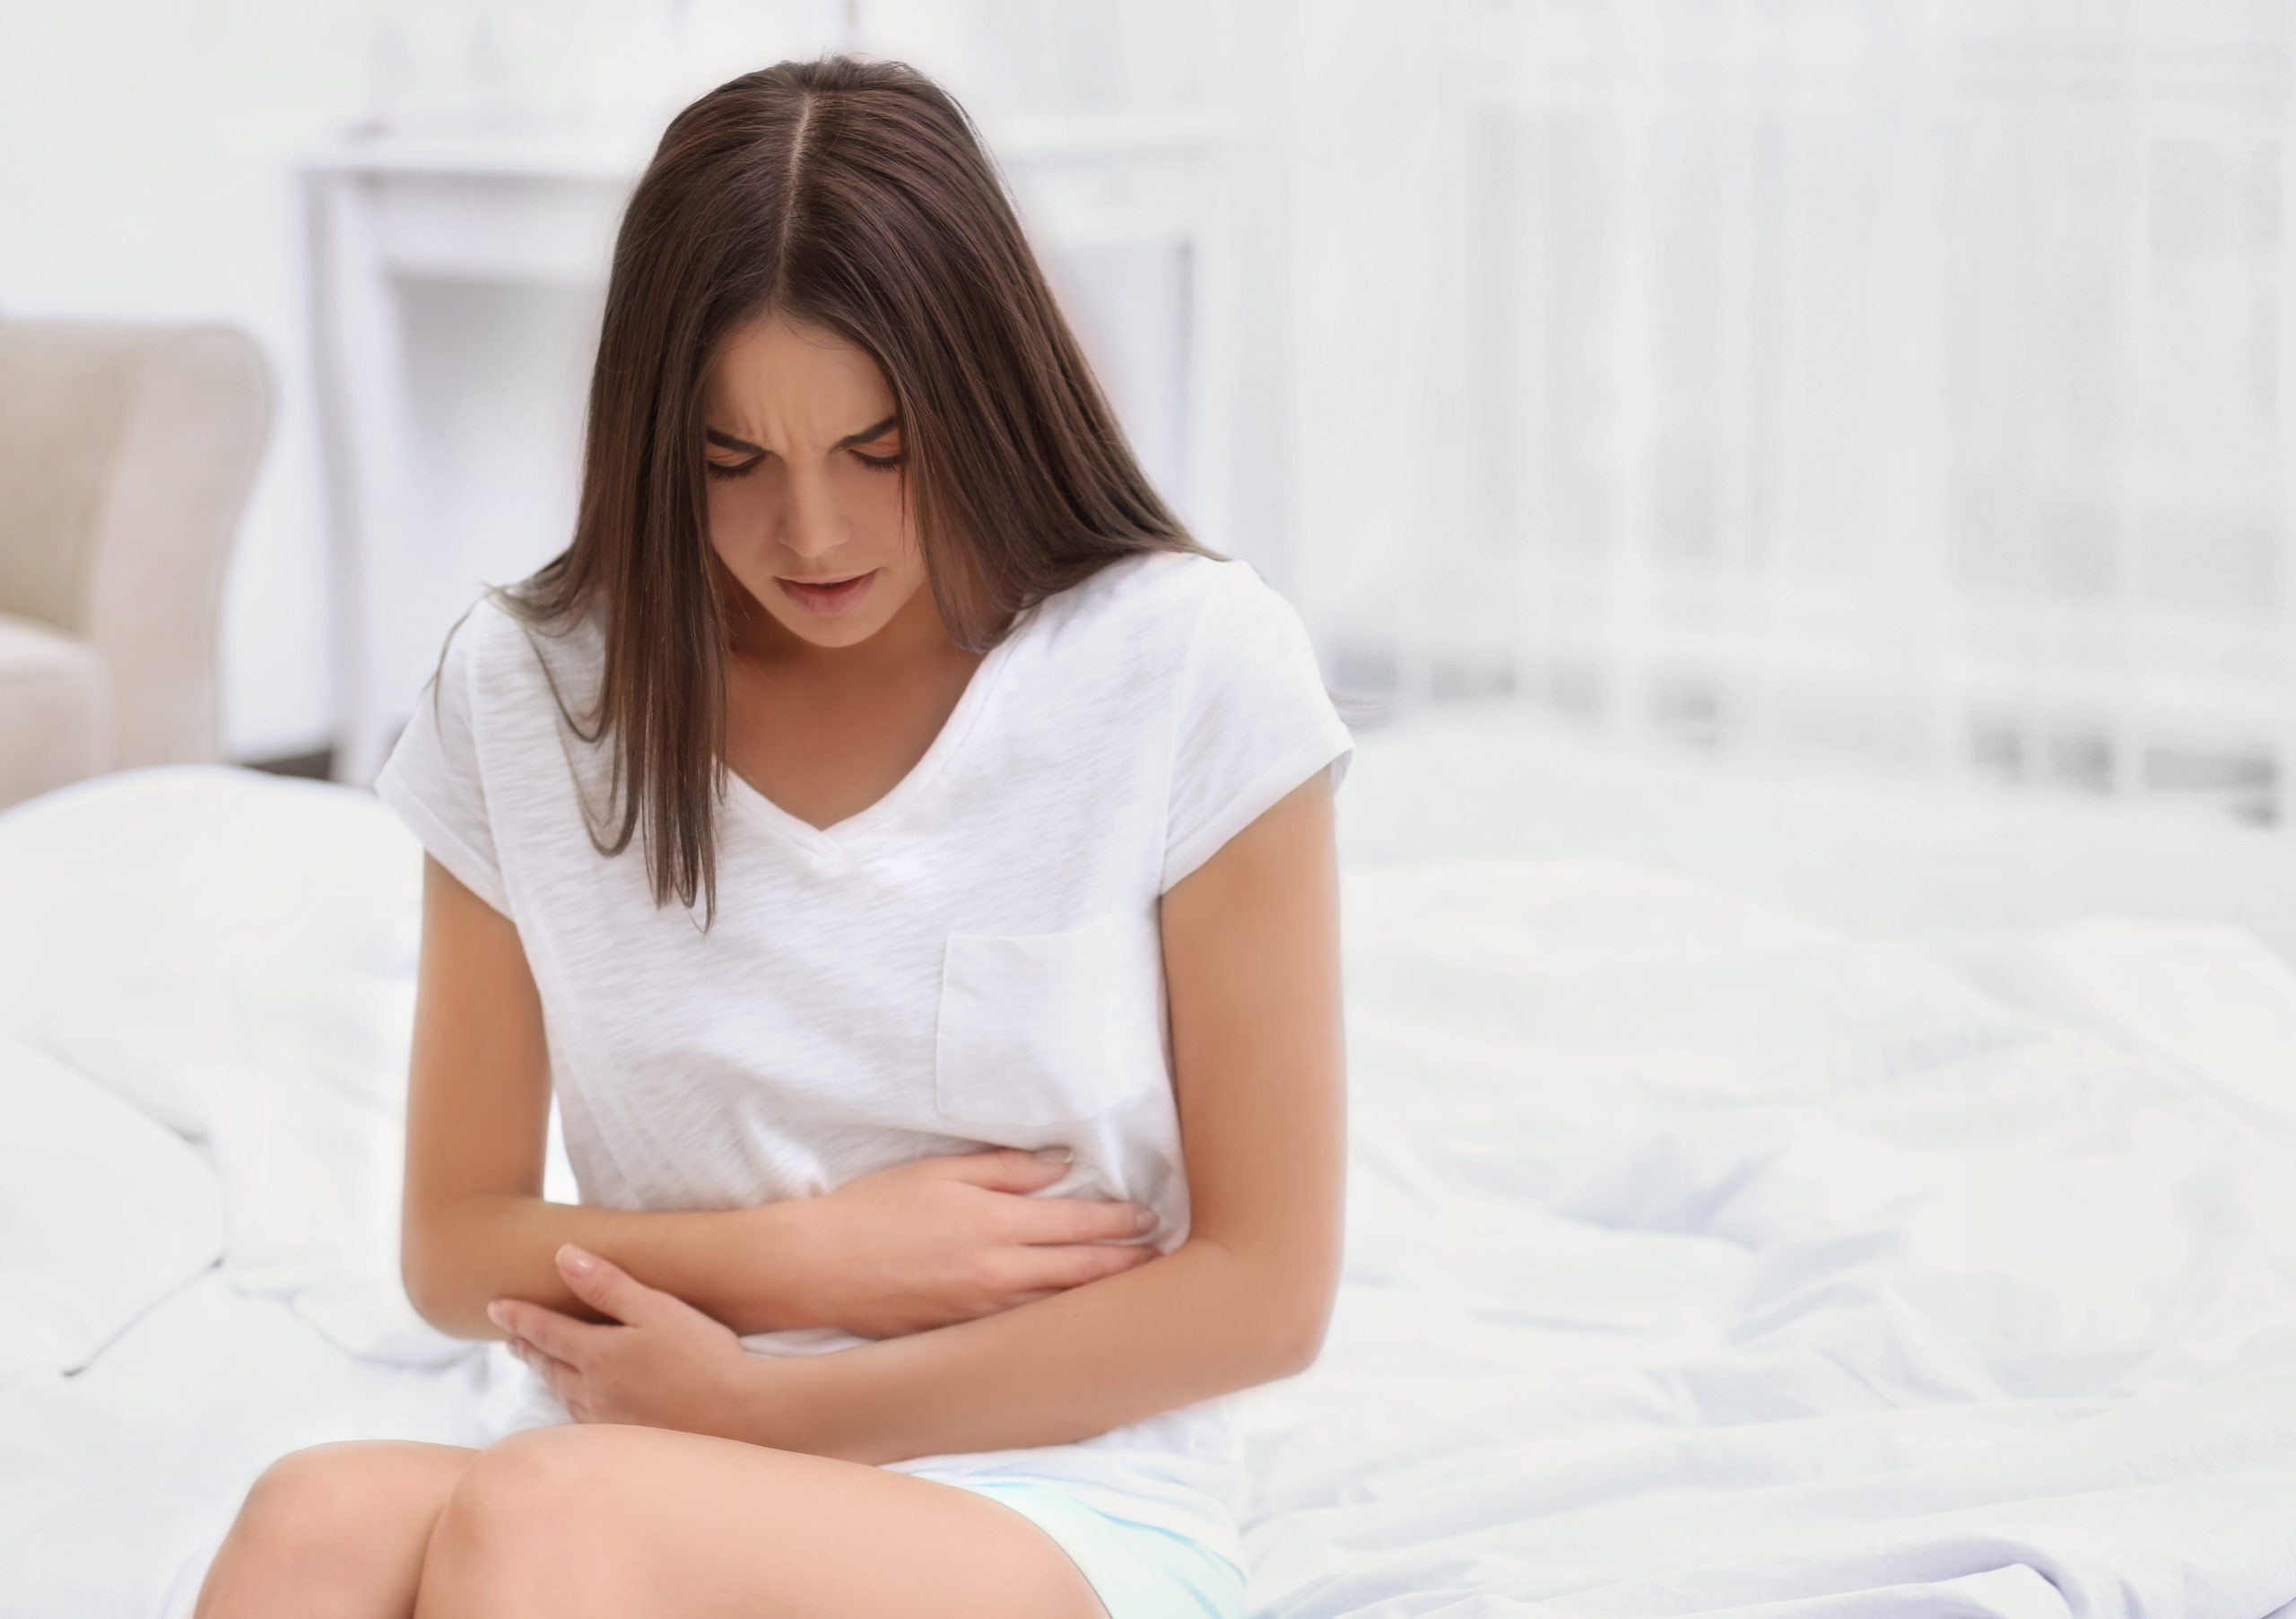 Is There a Link Between Endometriosis and Periodontal Disease?